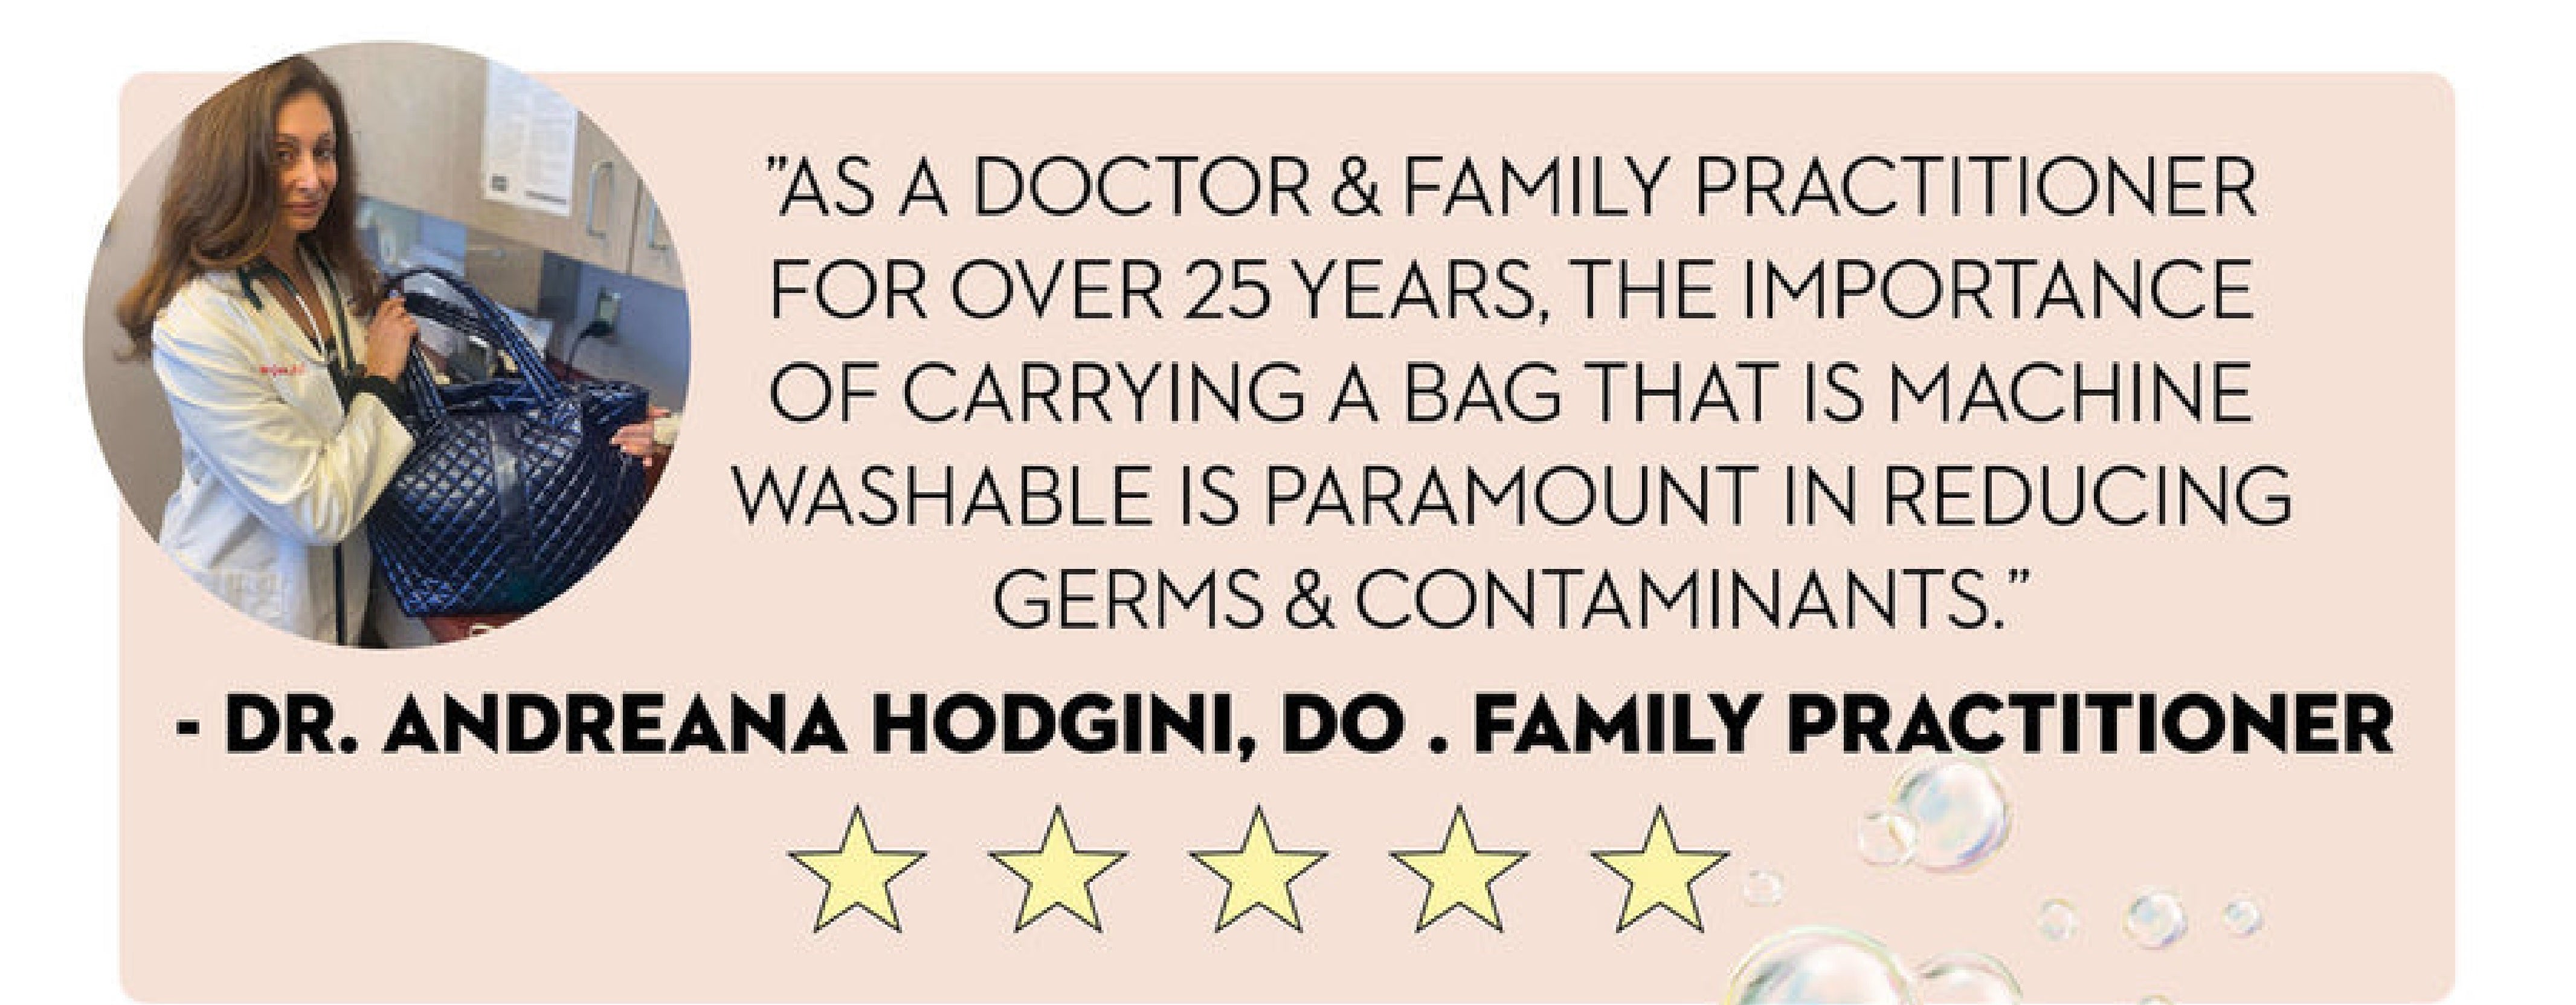 As a doctor and family practitioner for over 25 years, the importance of carrying a bag that is machine washable is paramount in reducing germs and contaminants. Dr. Andreana Hodgini, D O, Family Practitioner.